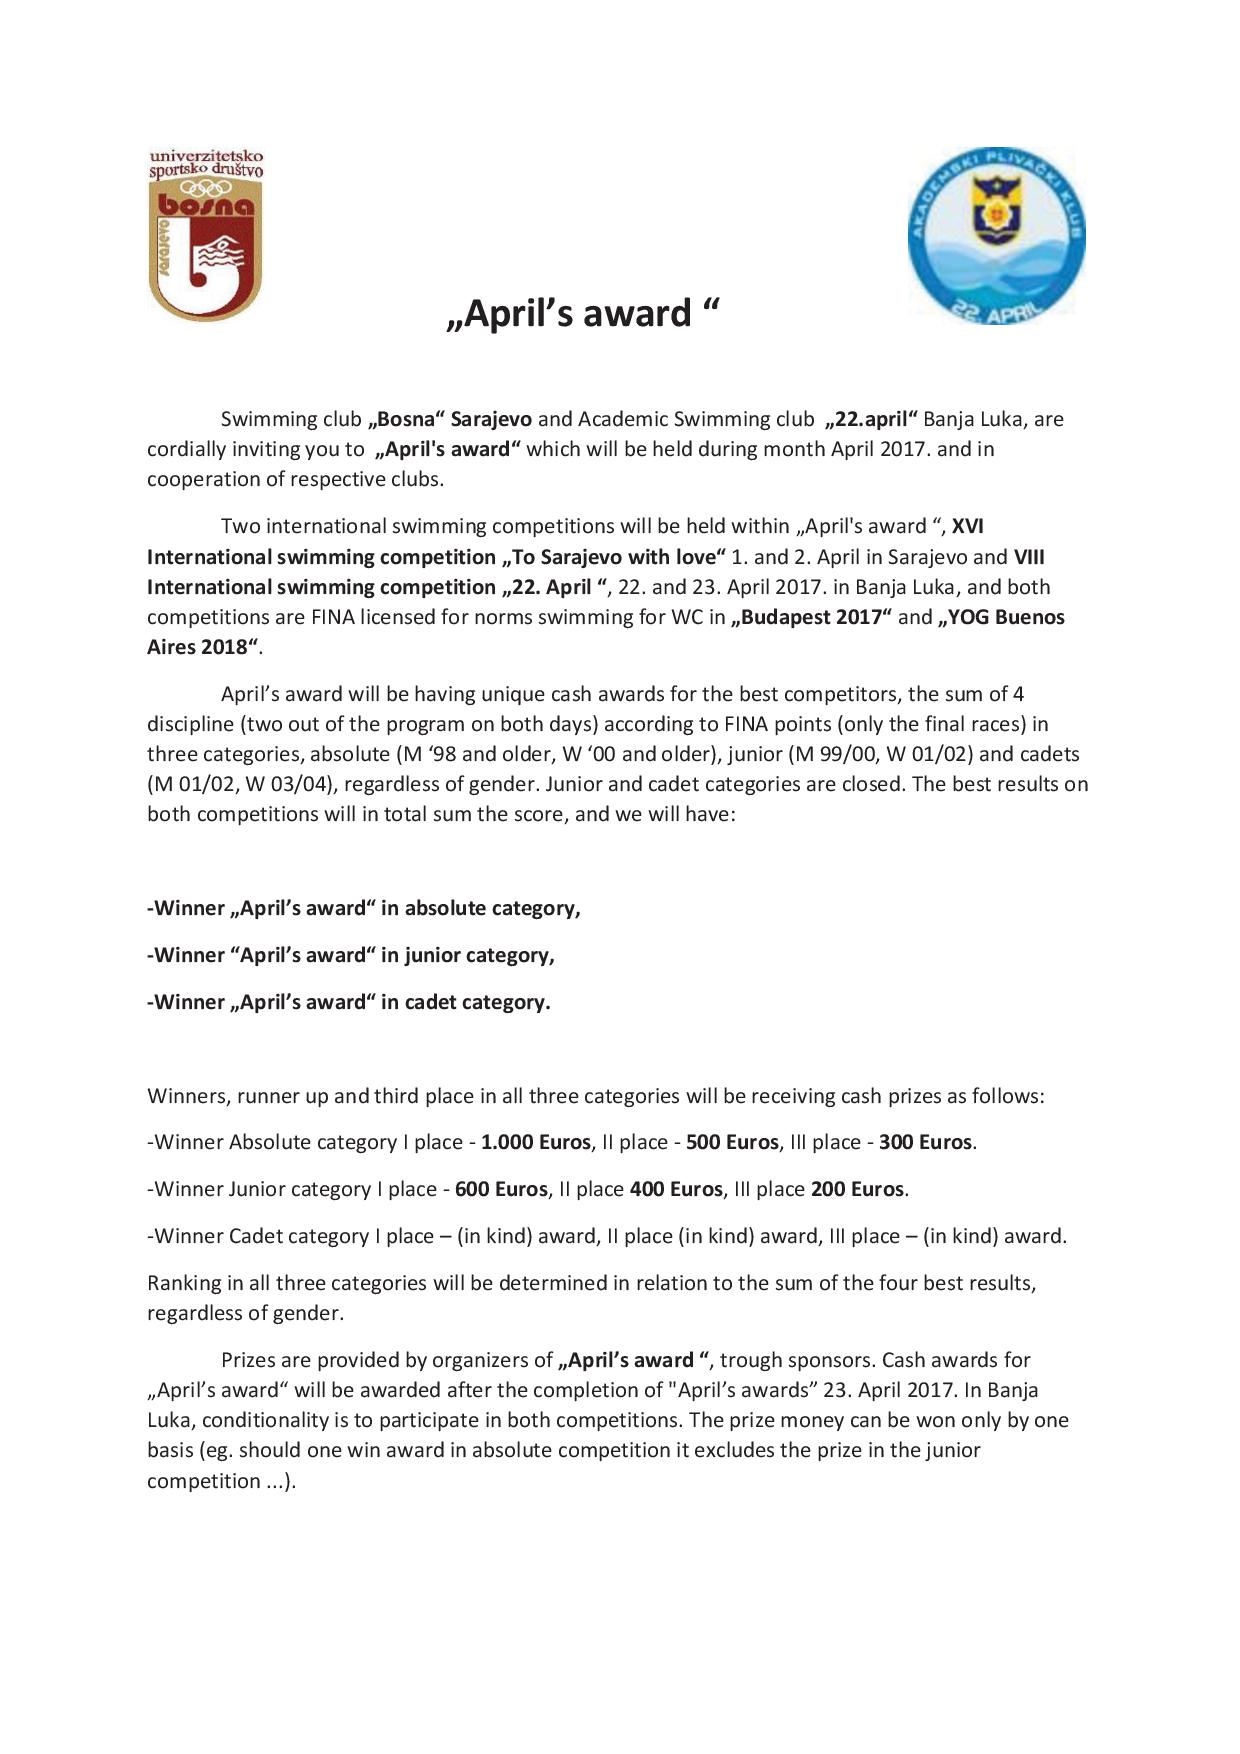 Original proposition of competition - APRIL-S AWARDS